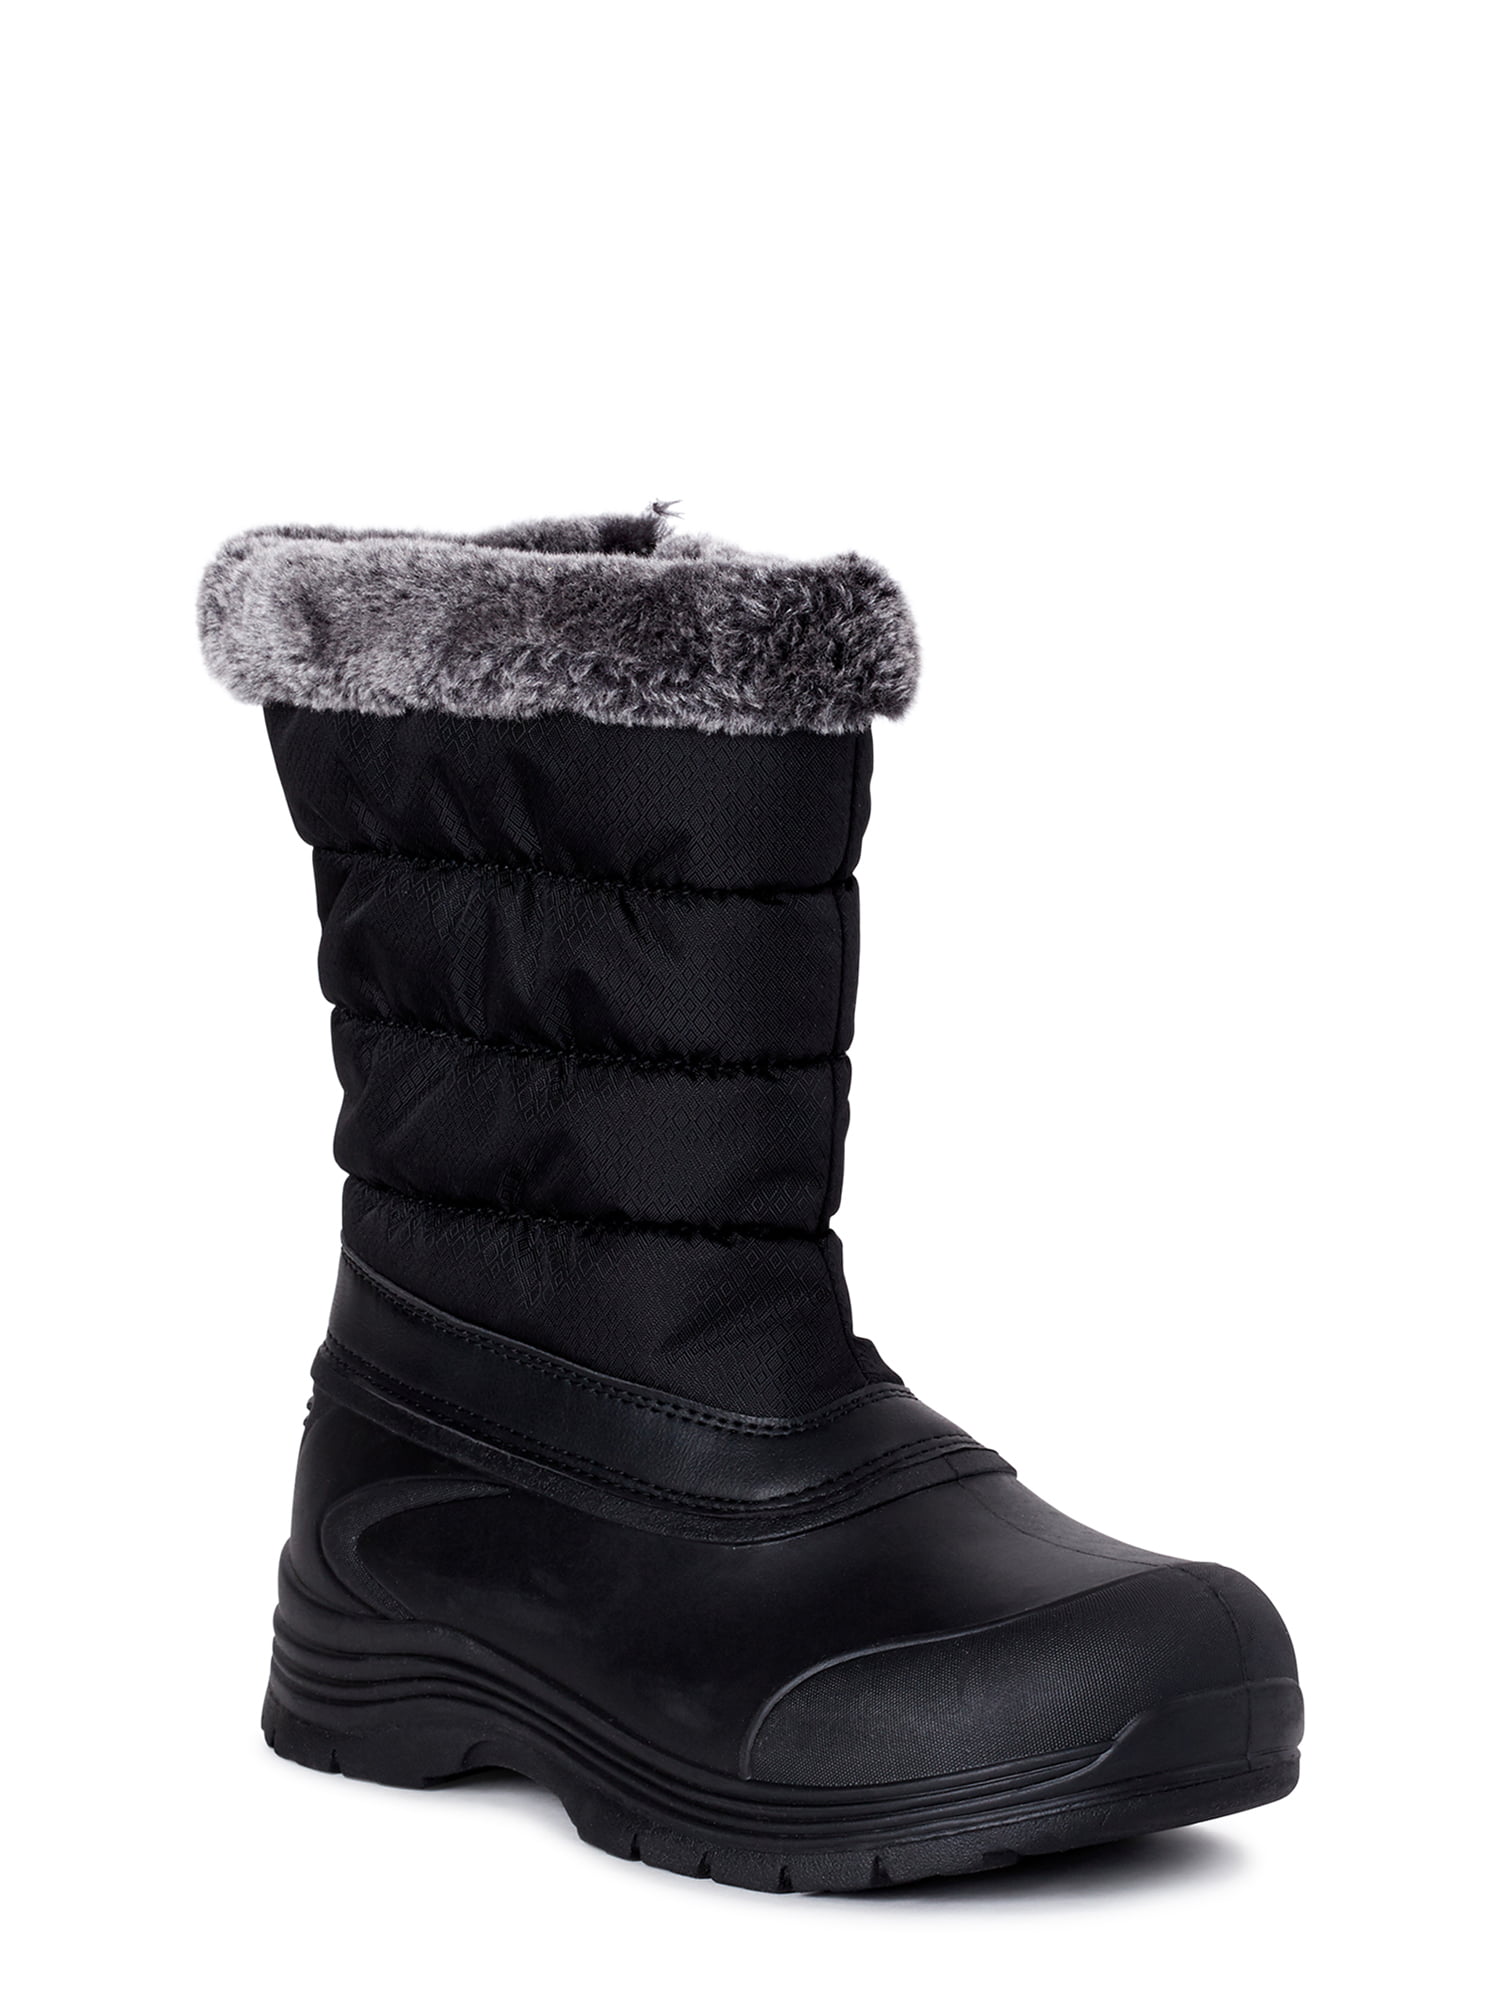 Women's Time and Tru Tall Slouch Winter Black Boot